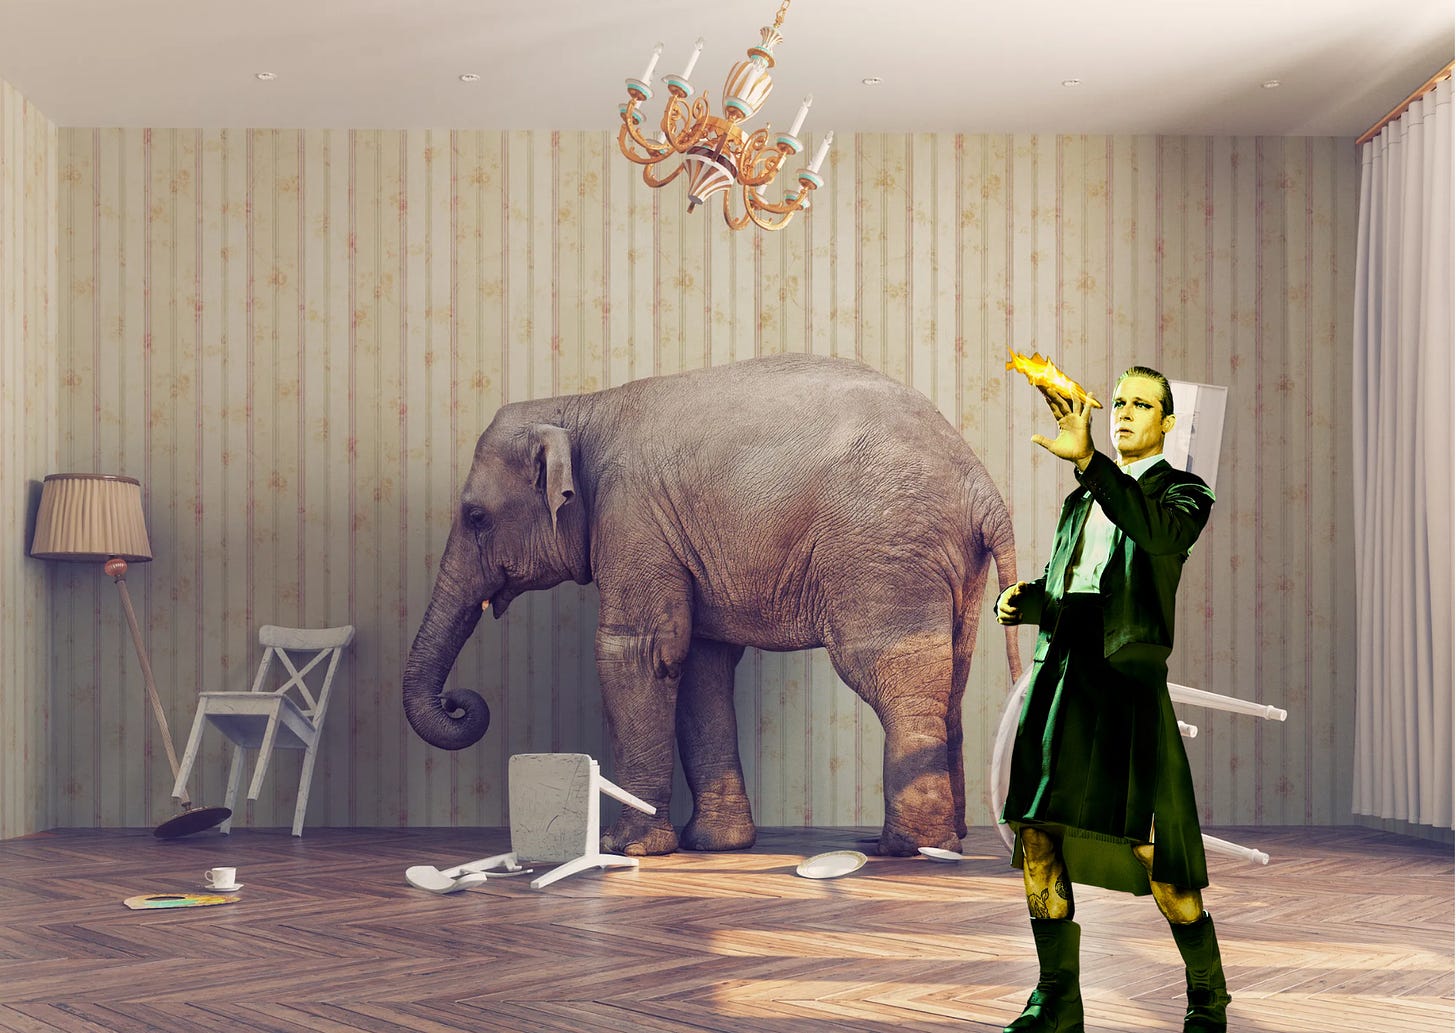 Brad Pitt with the elephant in the room. Oh yes, I'm being tediously literal.